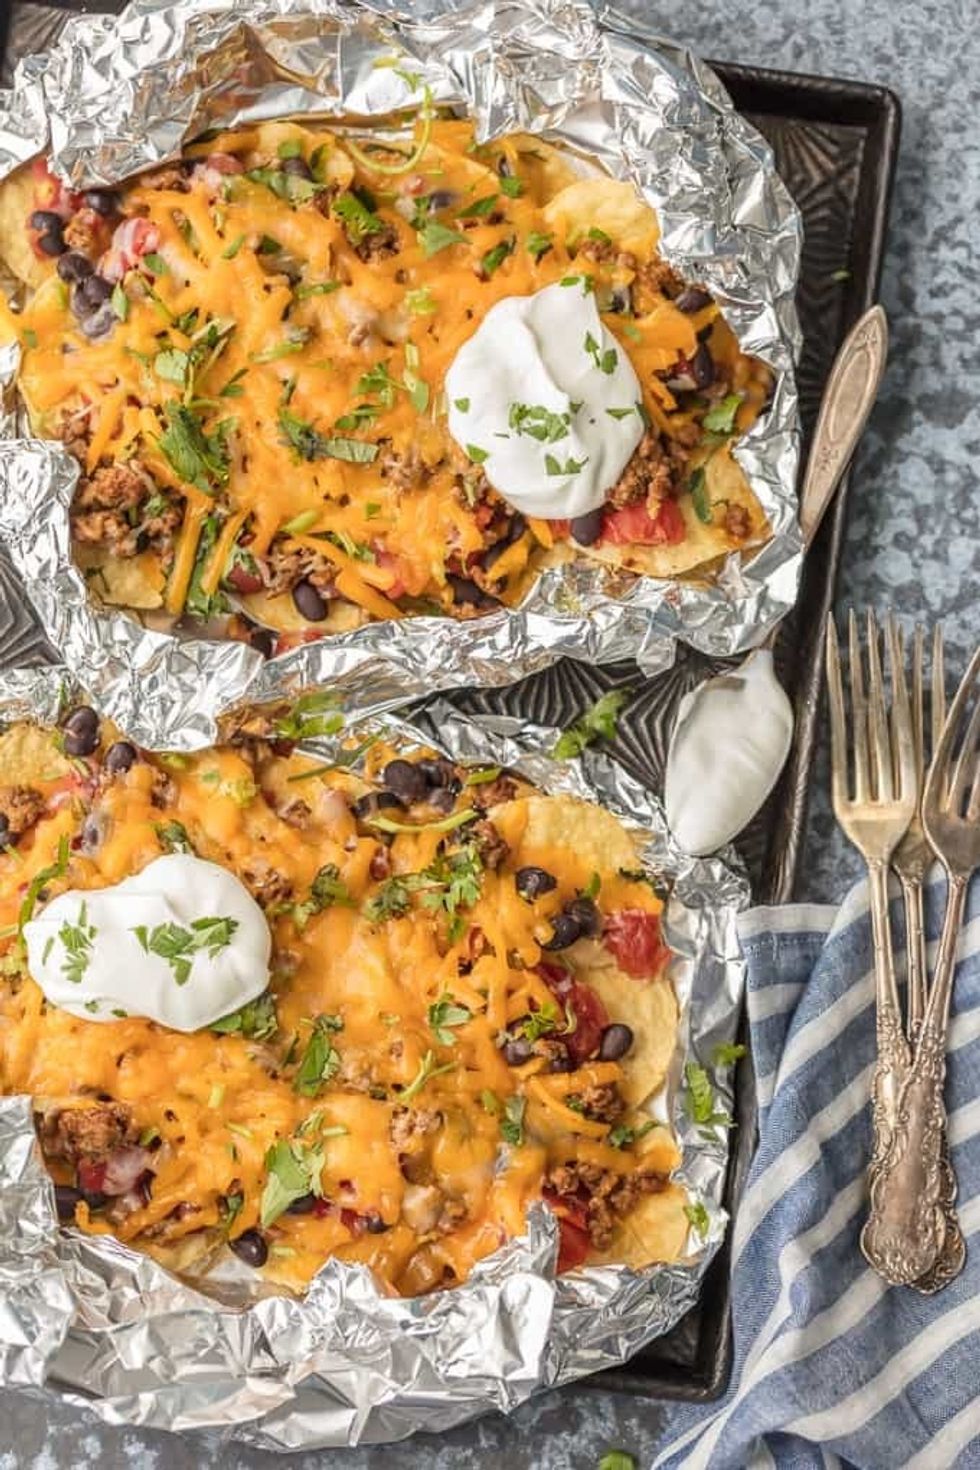 These foil pack nachos with black beans, cheese, cilantro, and sour cream are another easy camping foods